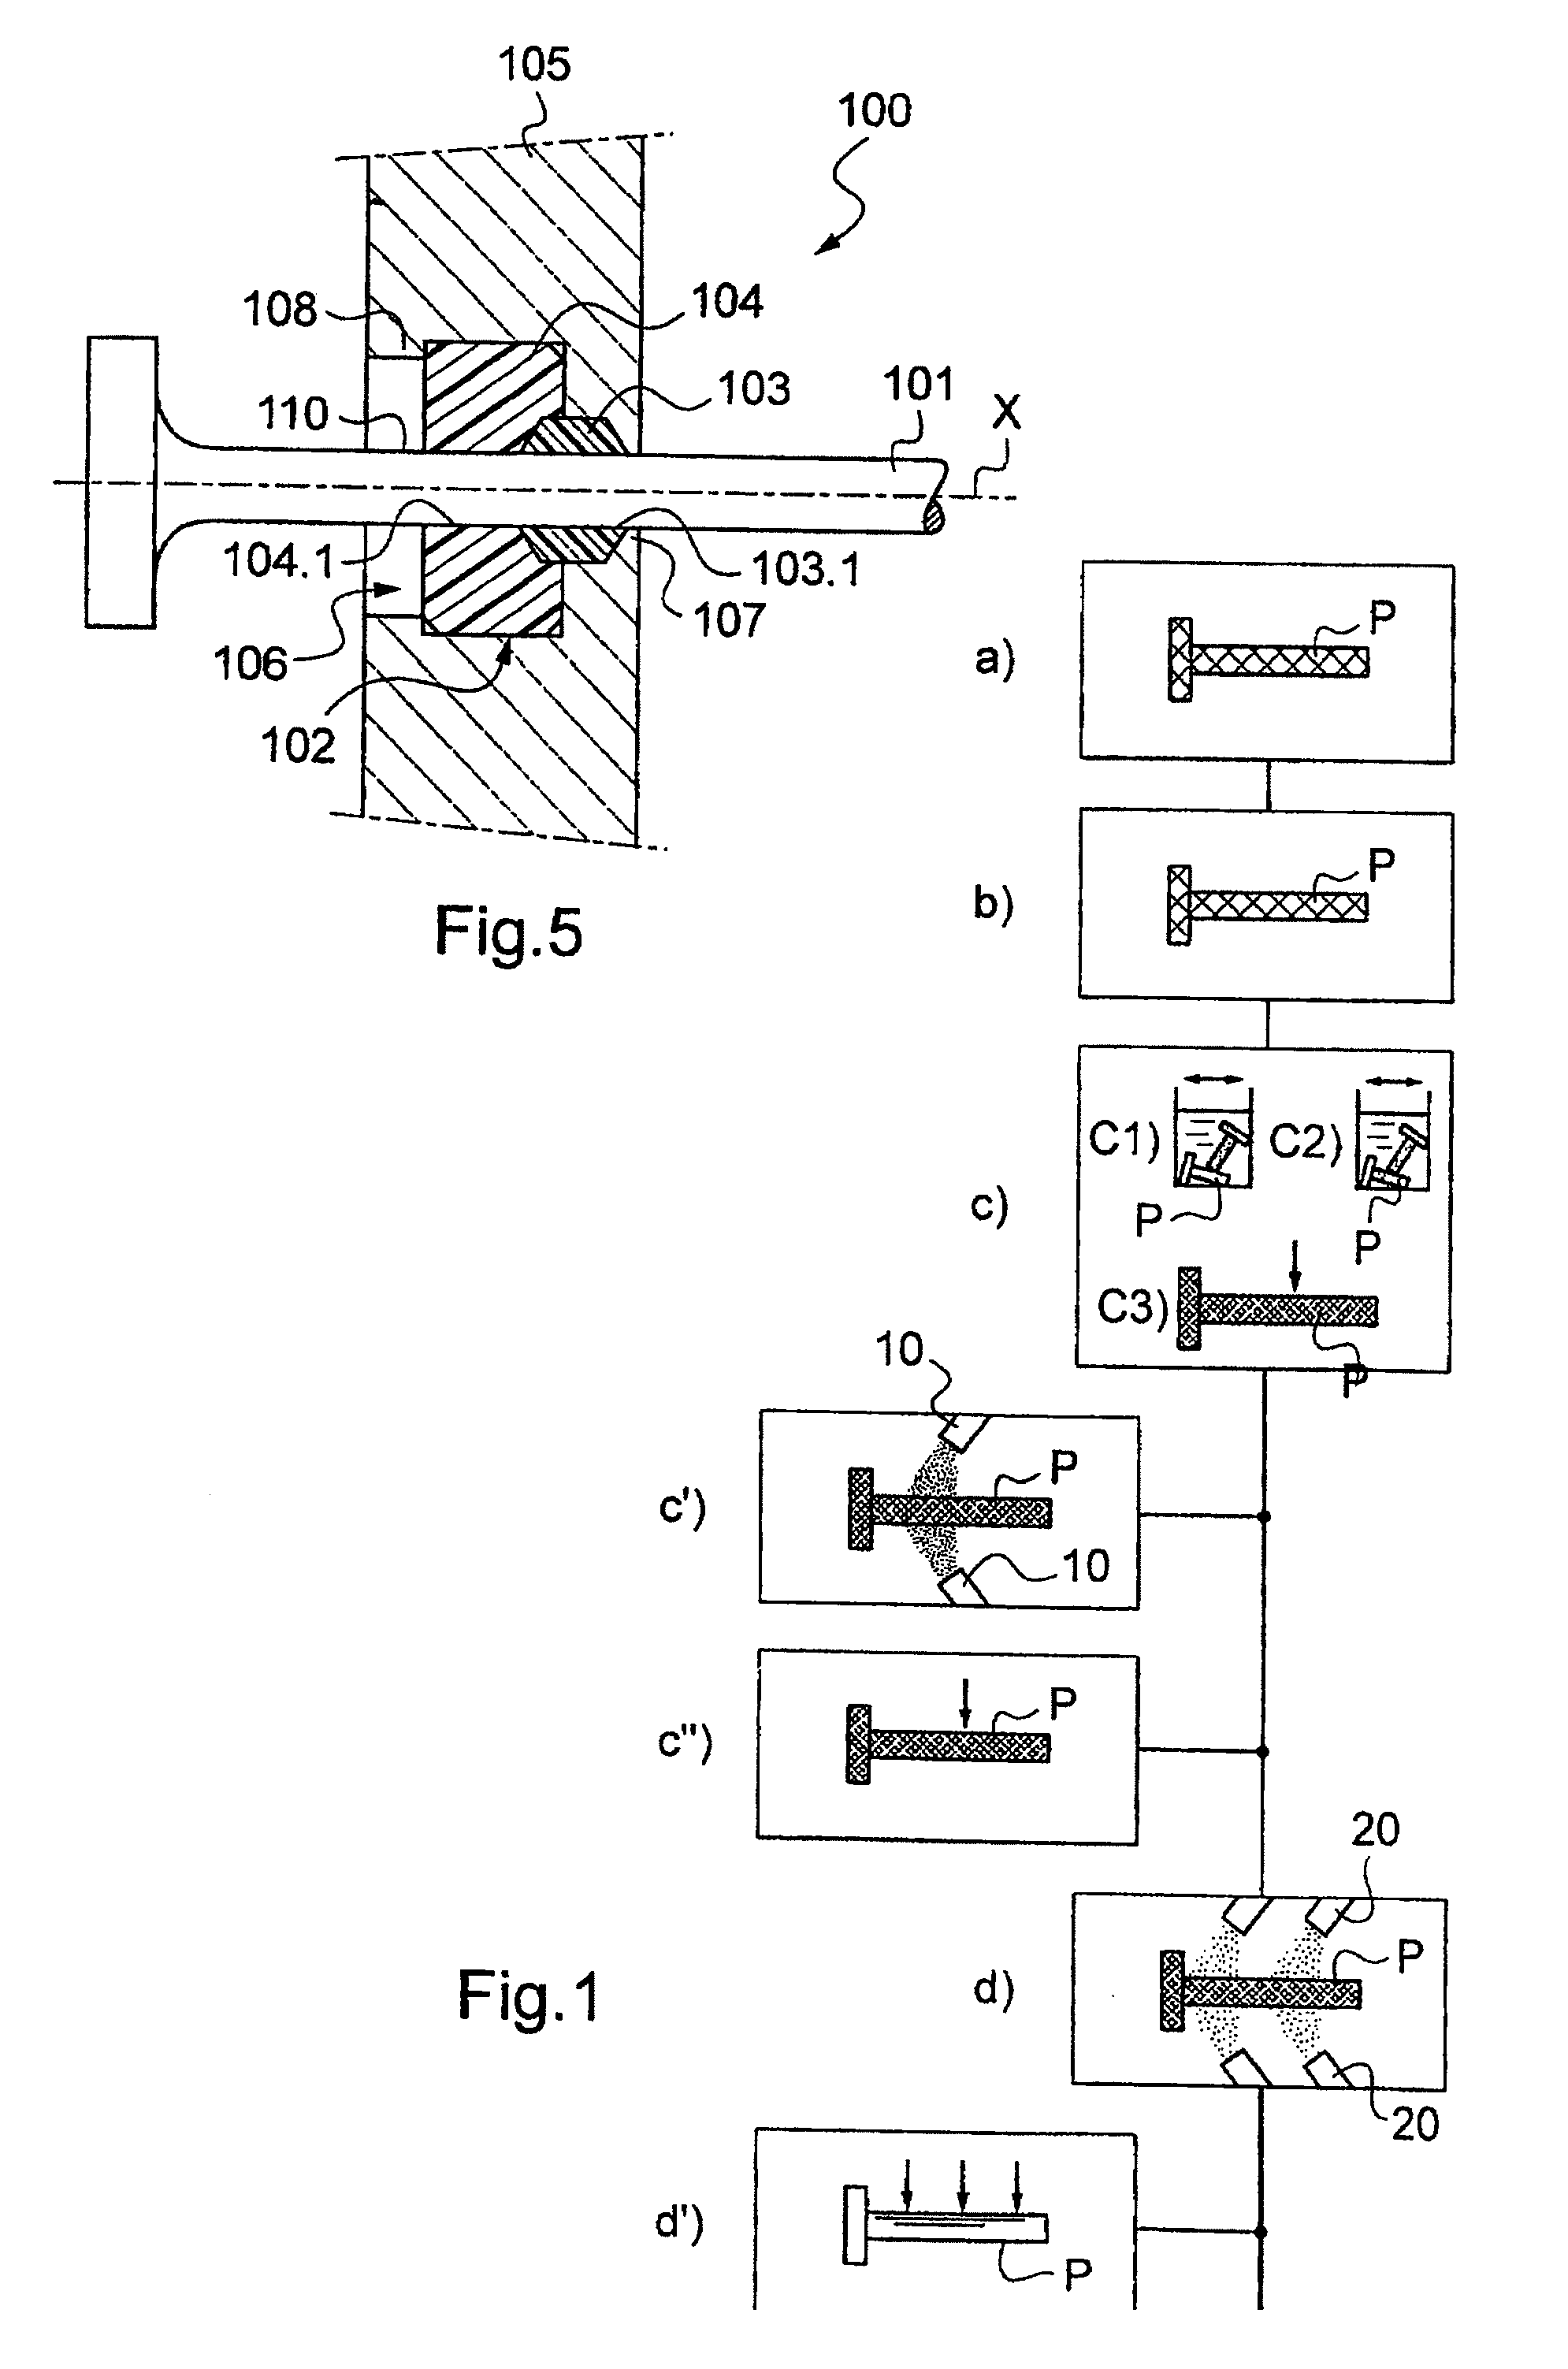 Method of surface treating a mechanical part made of high-strength steel, and a sealing system obtained by implementing said method